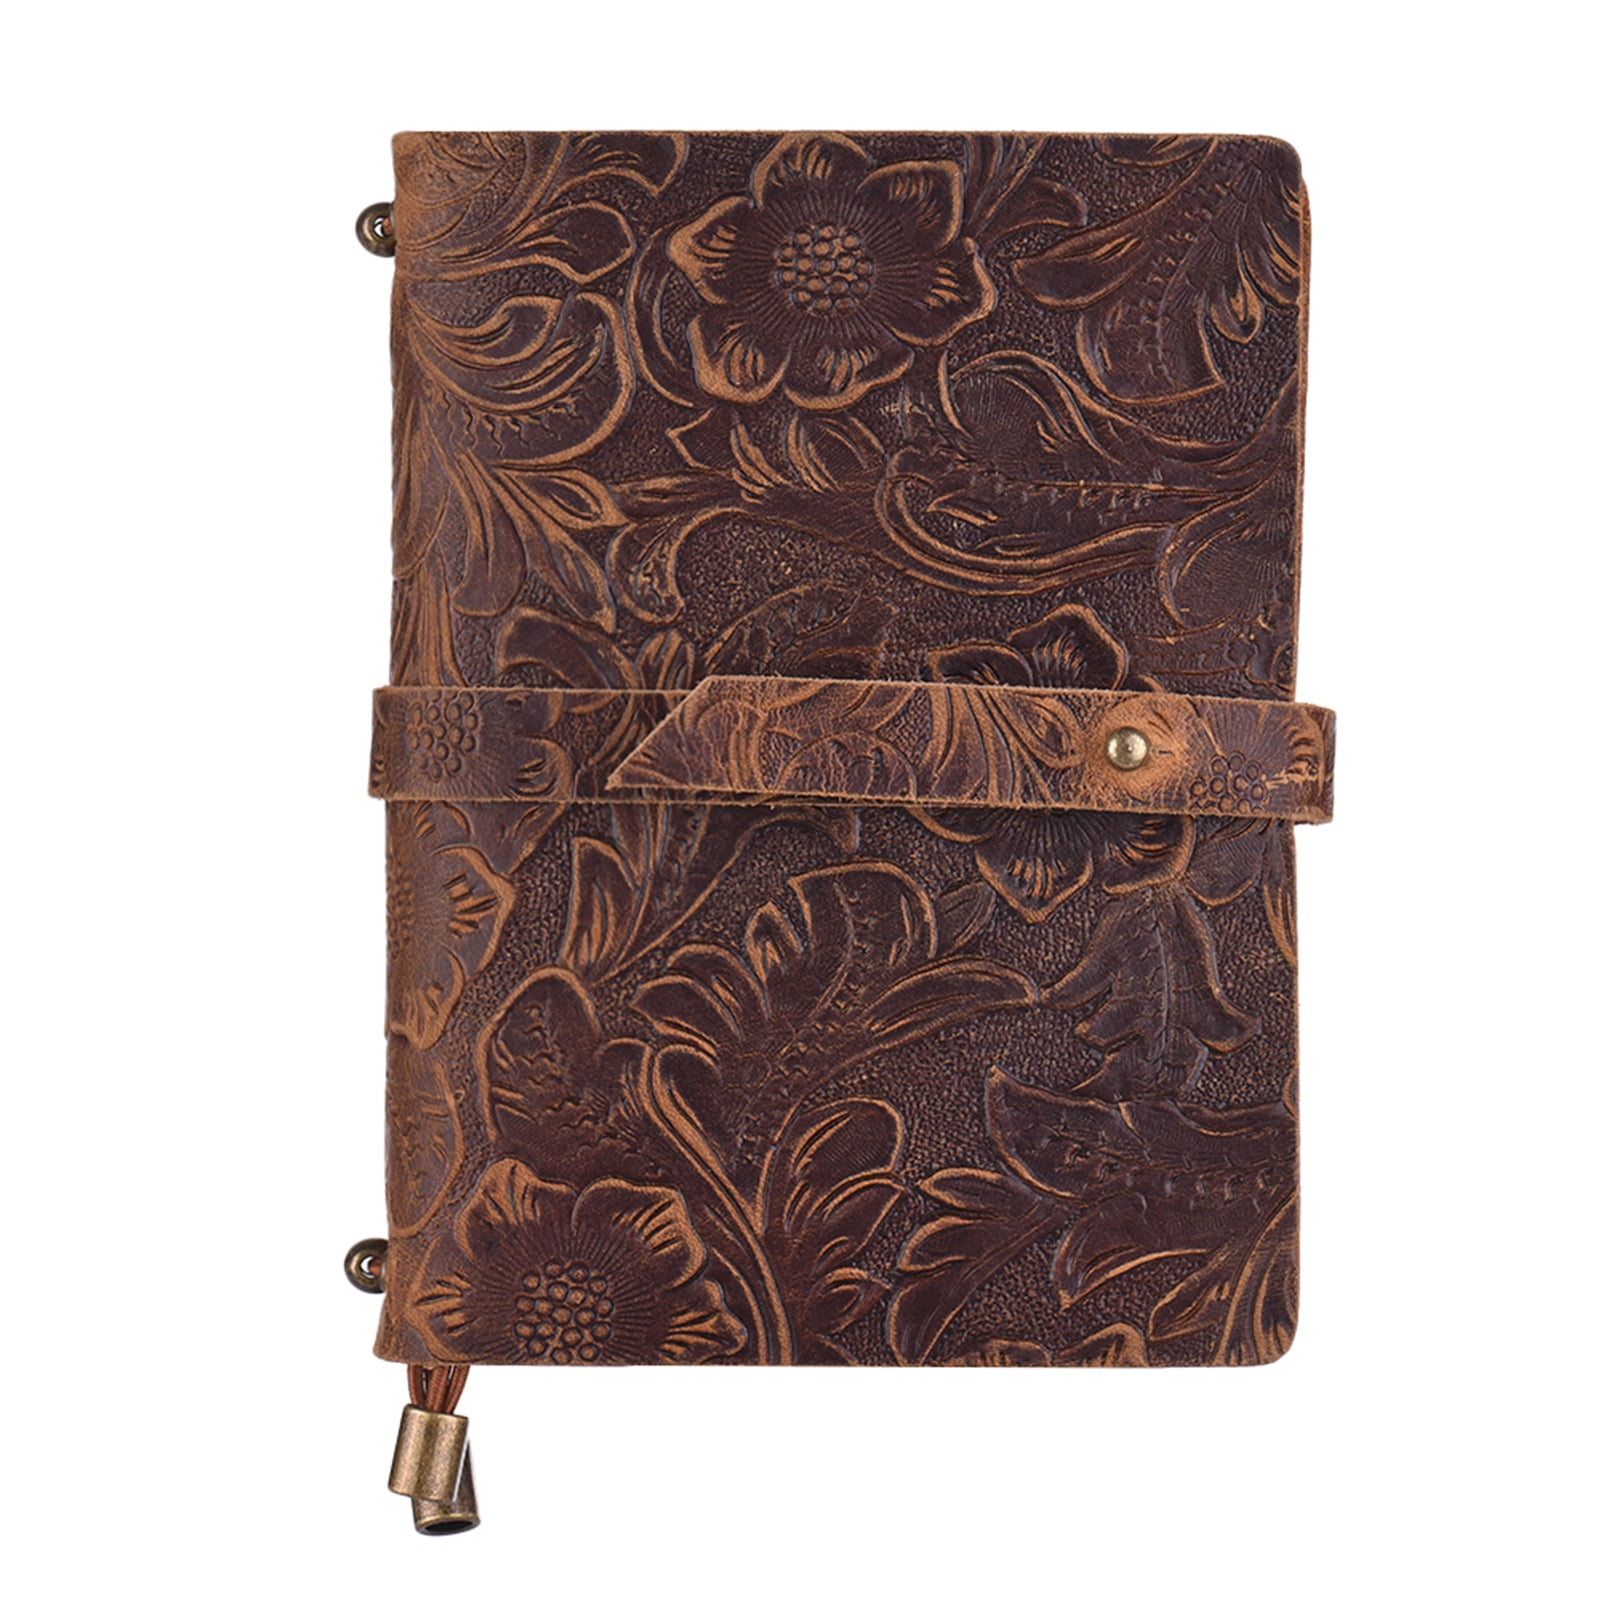 New Handmade Tree of Life Embossed Tanned Leather Journal Notebook With Lock 